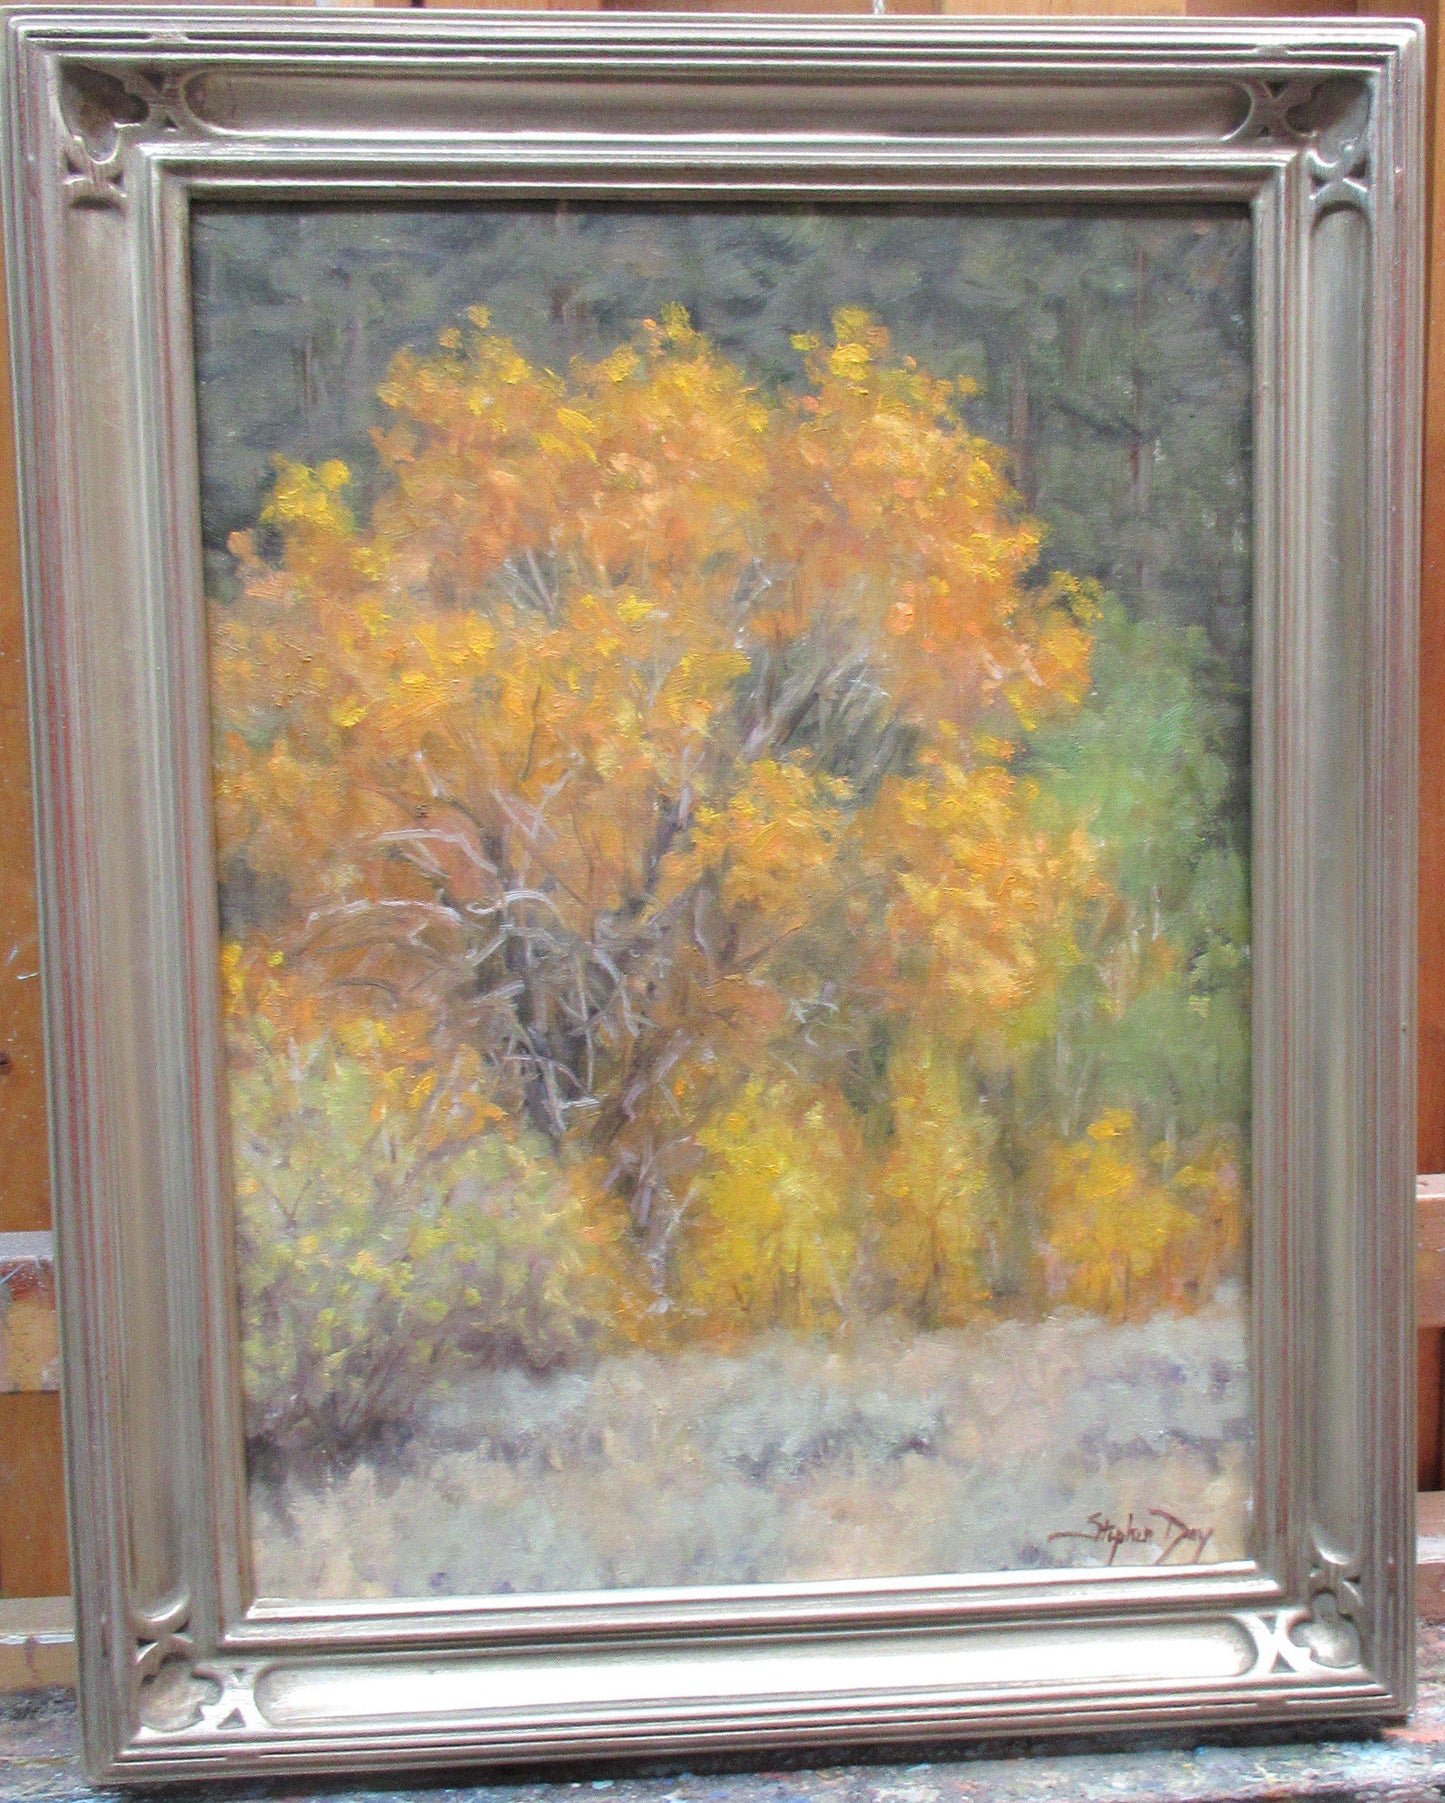 Canyon Cottonwood-Painting-Stephen Day-Sorrel Sky Gallery